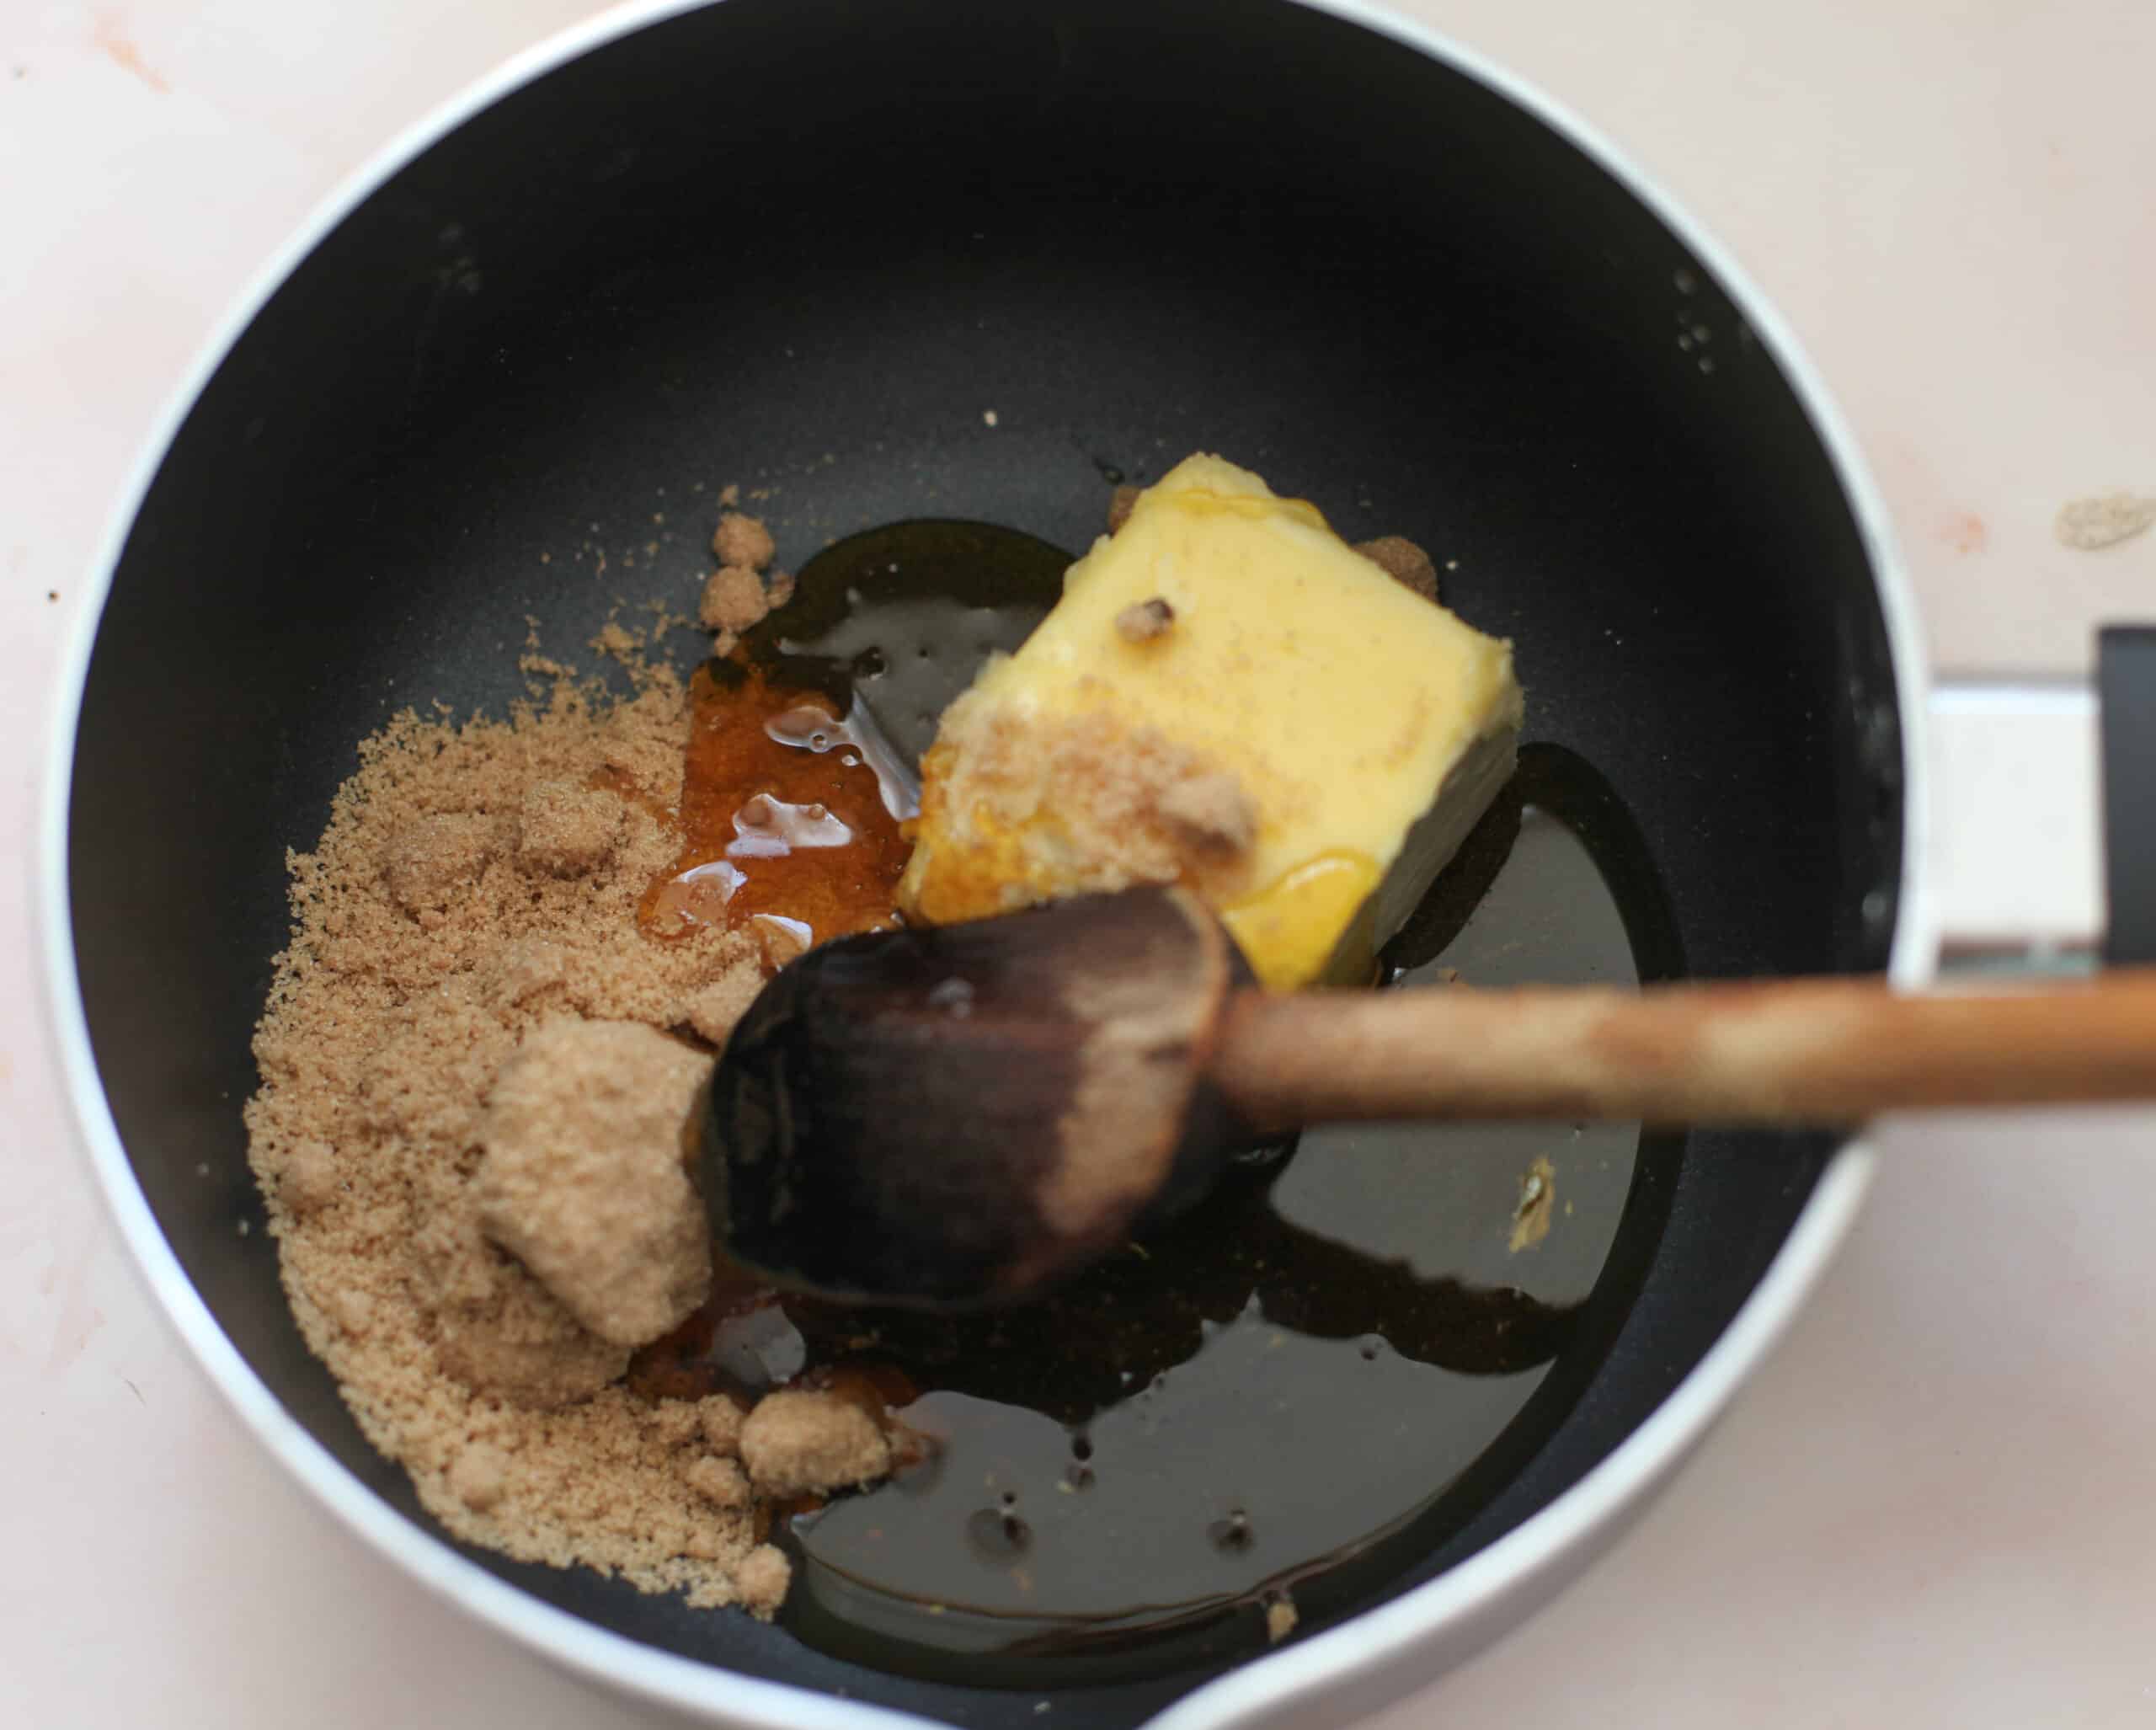 Melting butter, sugar and golden syrup in a pan.